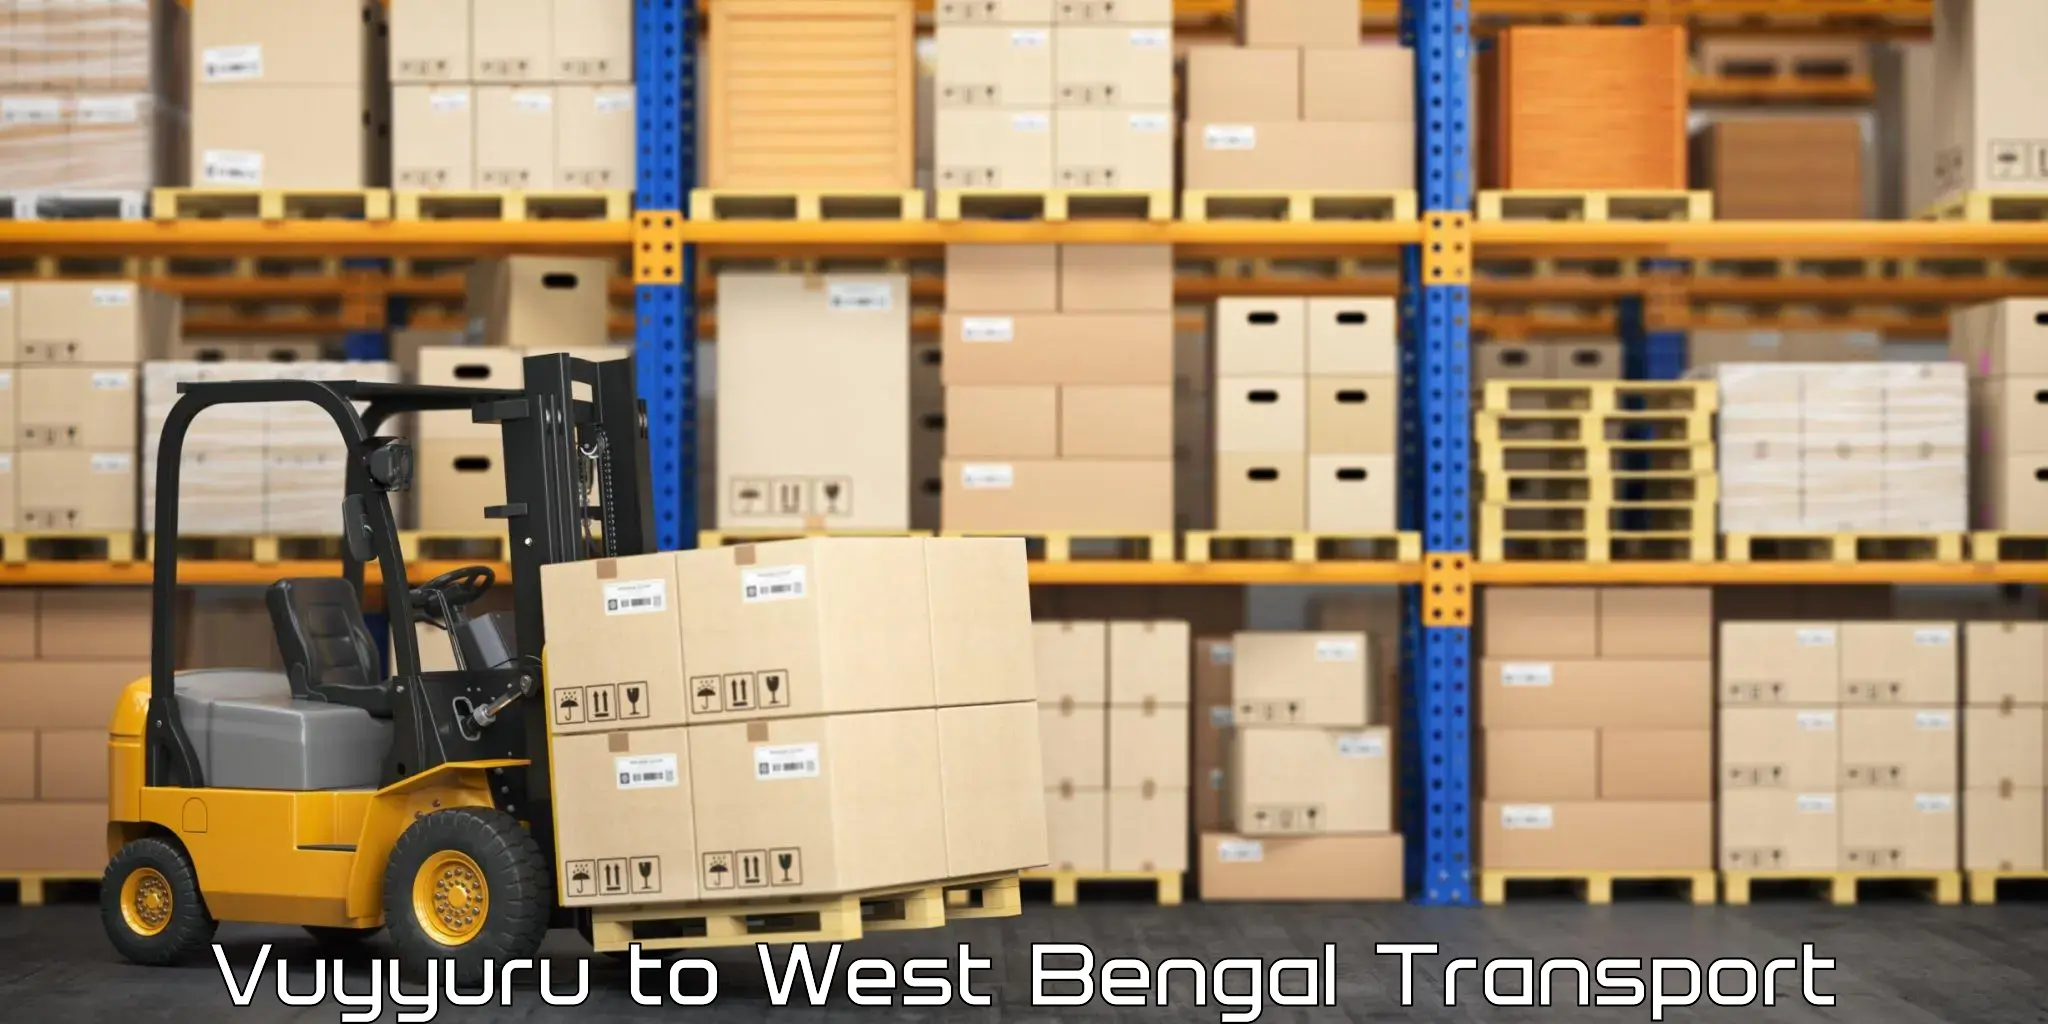 Daily parcel service transport Vuyyuru to West Bengal